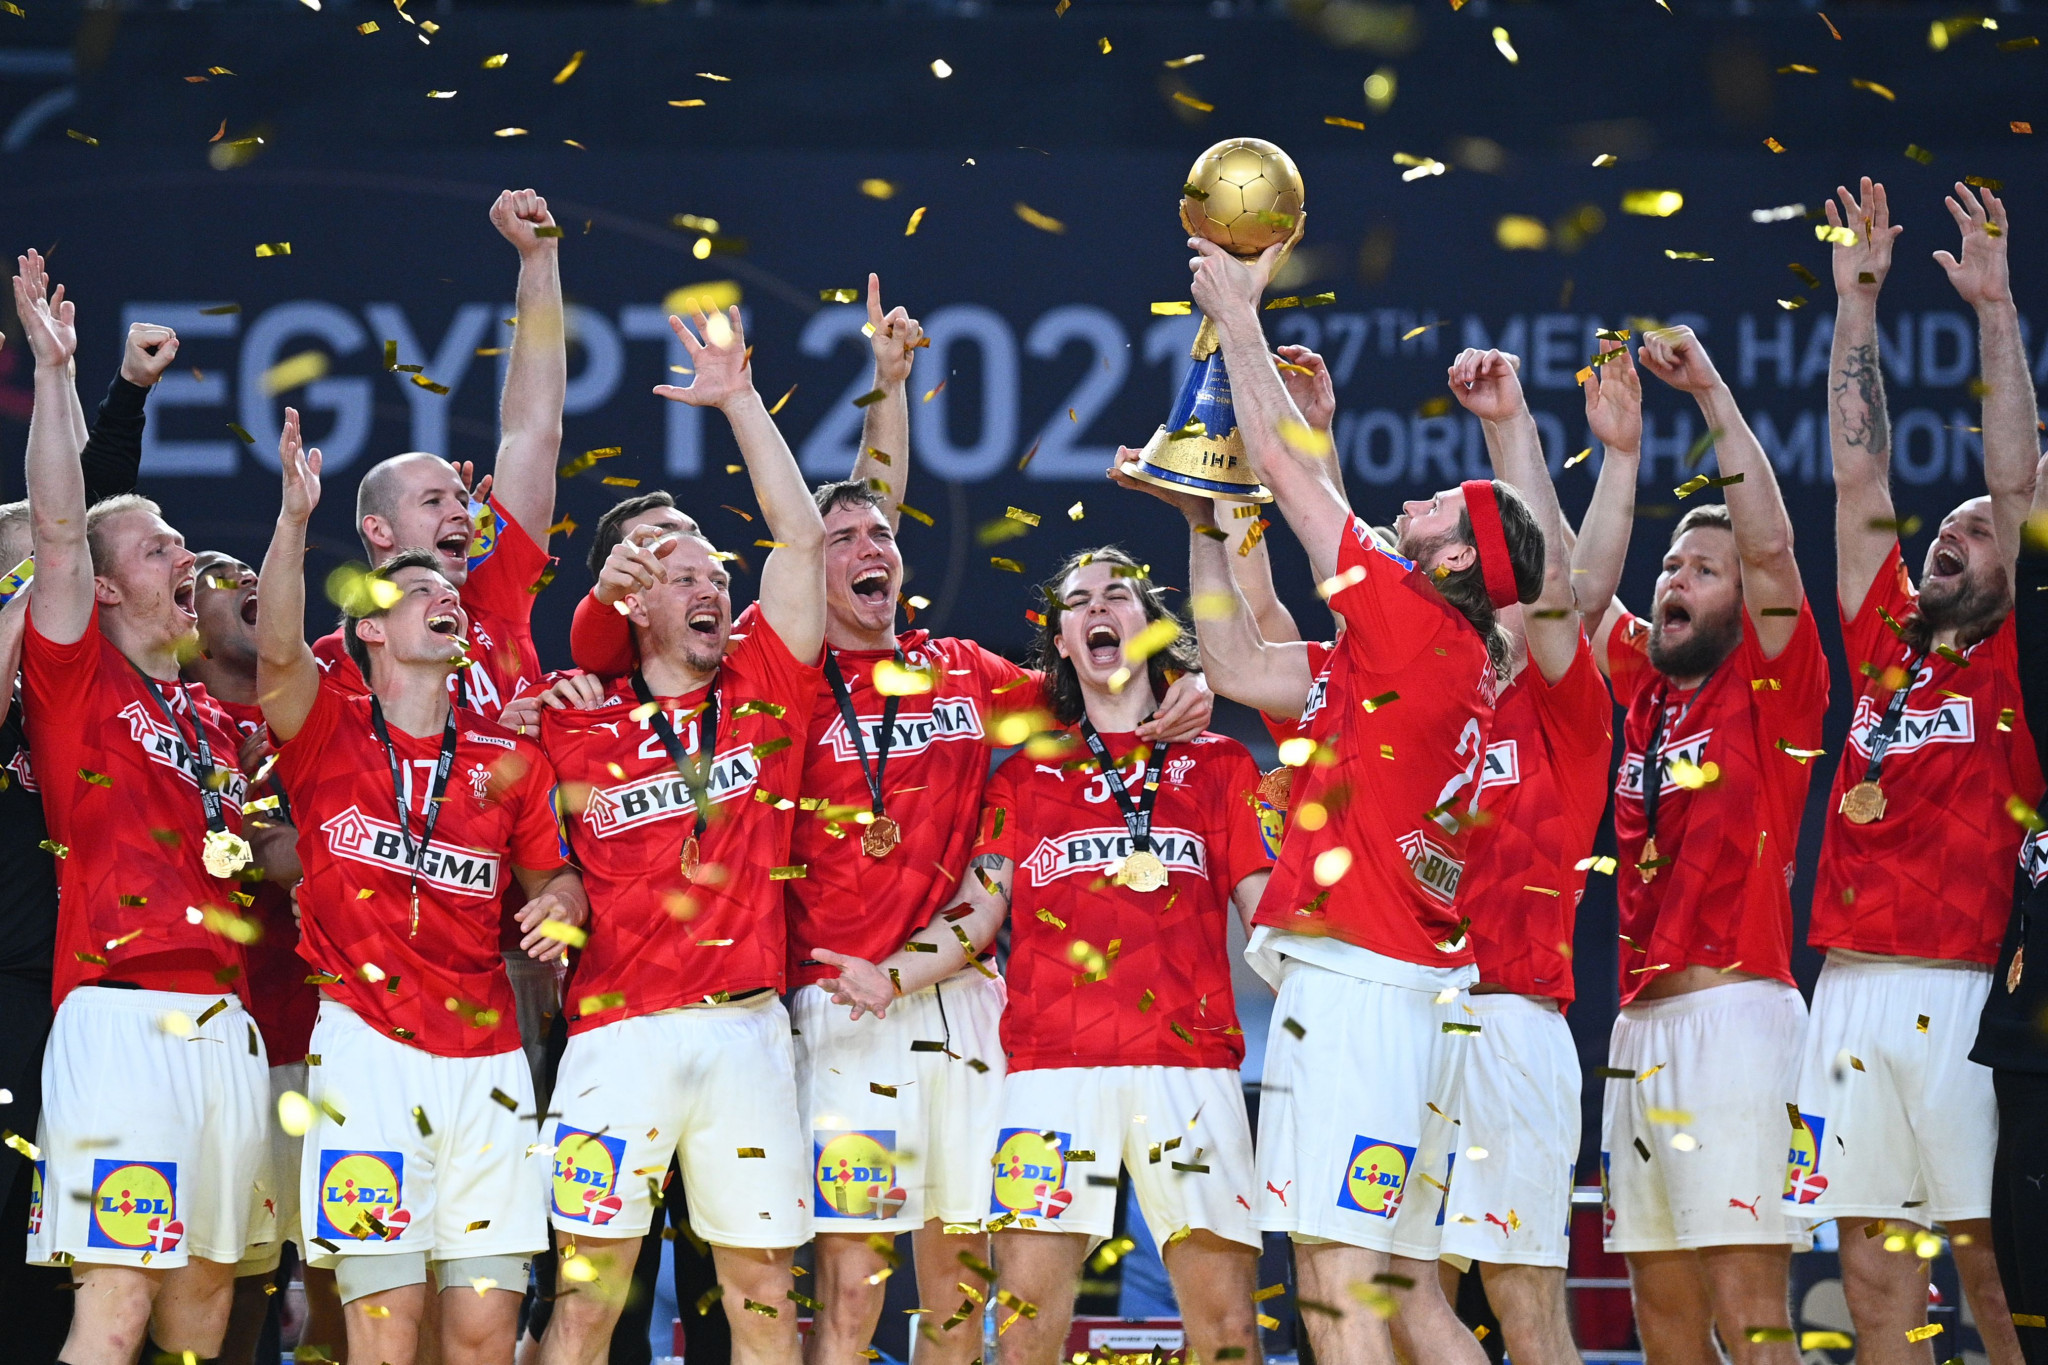 World champions Denmark are seeking consecutive men's Olympic titles ©Getty Images